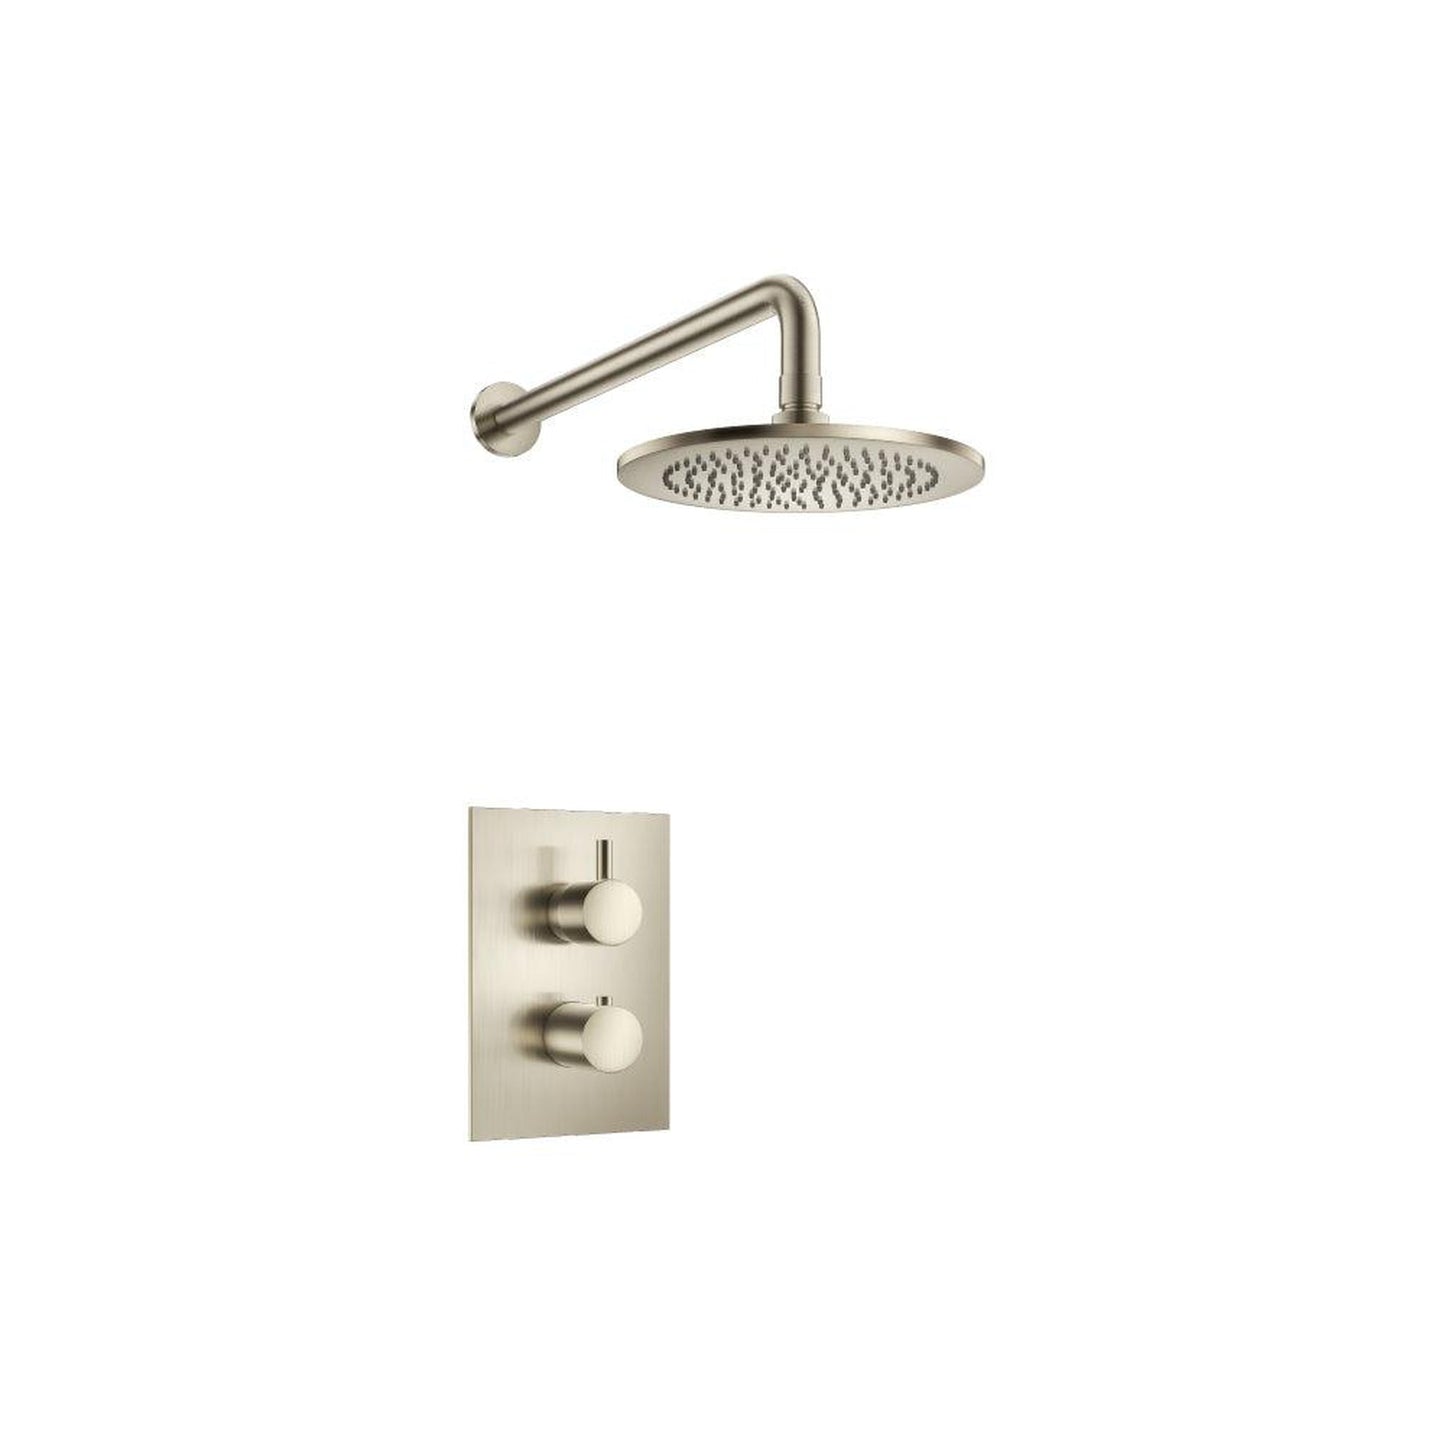 Isenberg Serie 100 Single Output Brushed Nickel PVD Wall-Mounted Shower Set With Single Function Round Rain Shower Head, Two-Handle Shower Trim and 1-Output Wall-Mounted Thermostatic Shower Valve With Integrated Volume Control